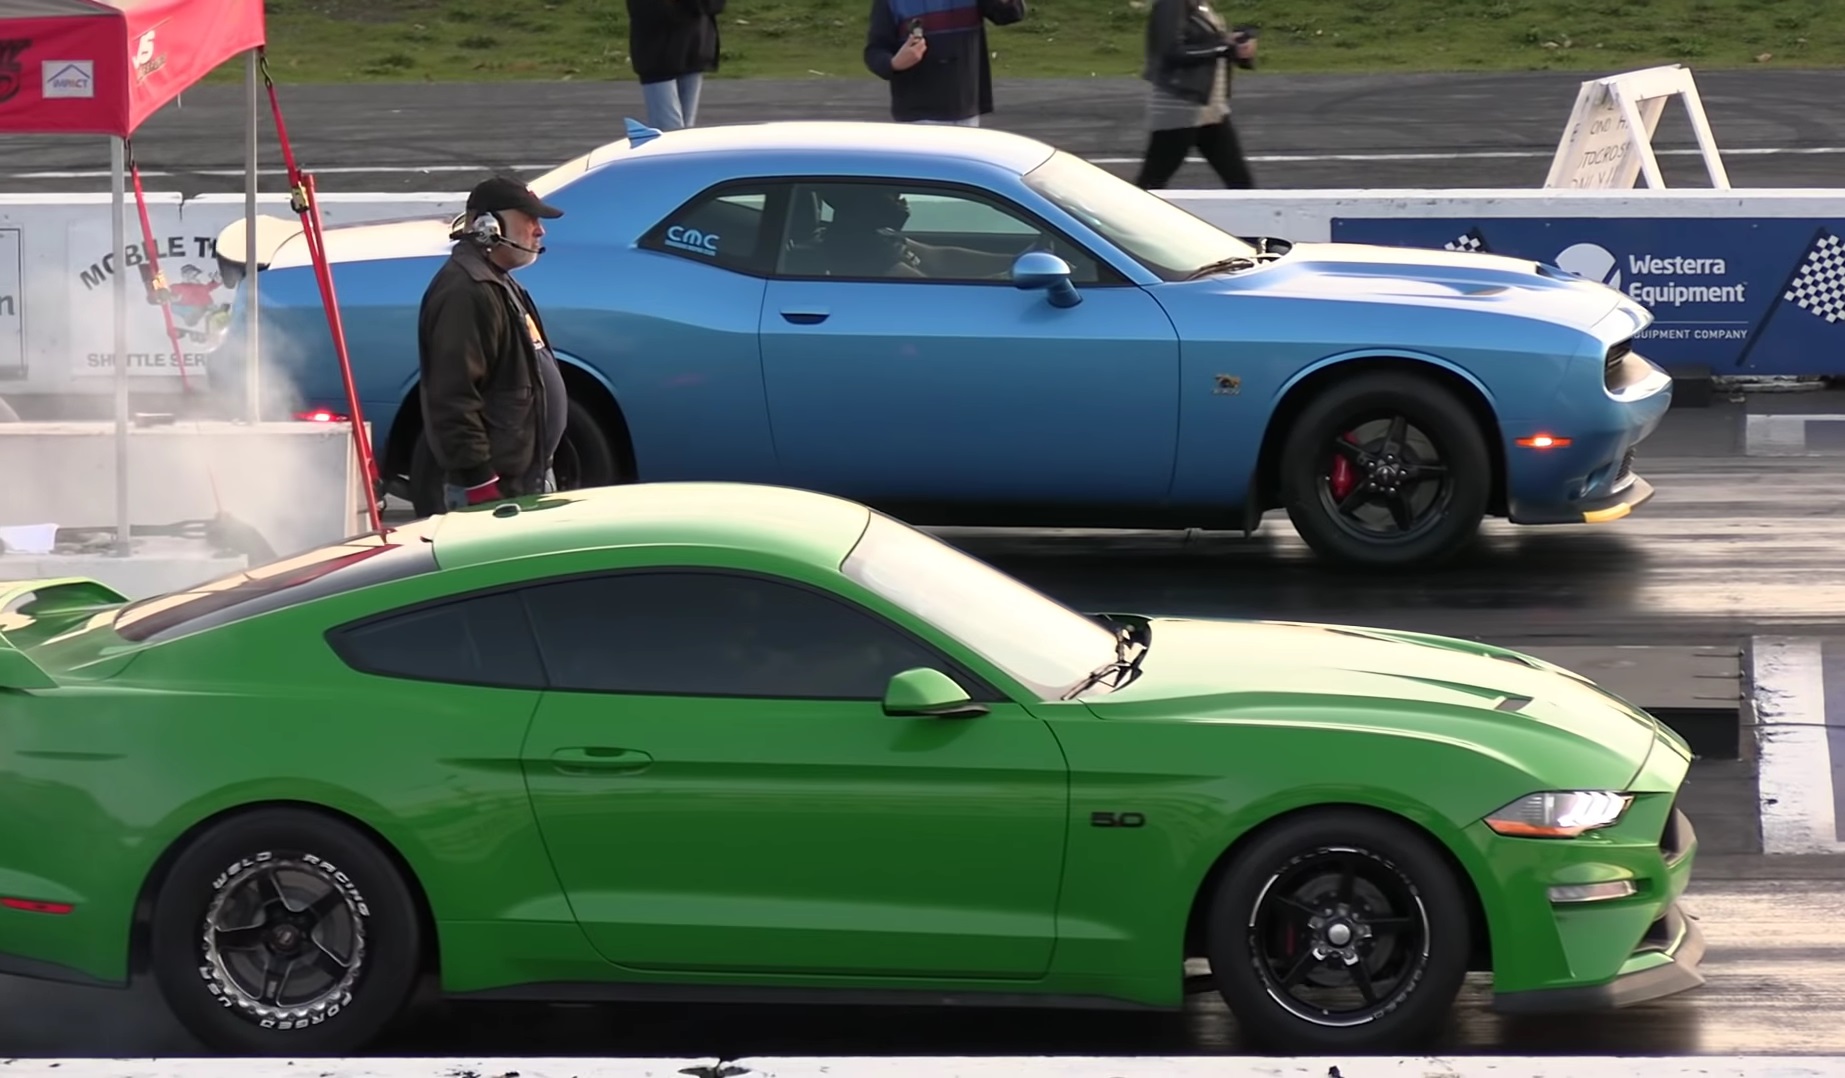 Video: 2018 Ford Mustang GT vs 2019 Challenger Scat Pack - Drag Race